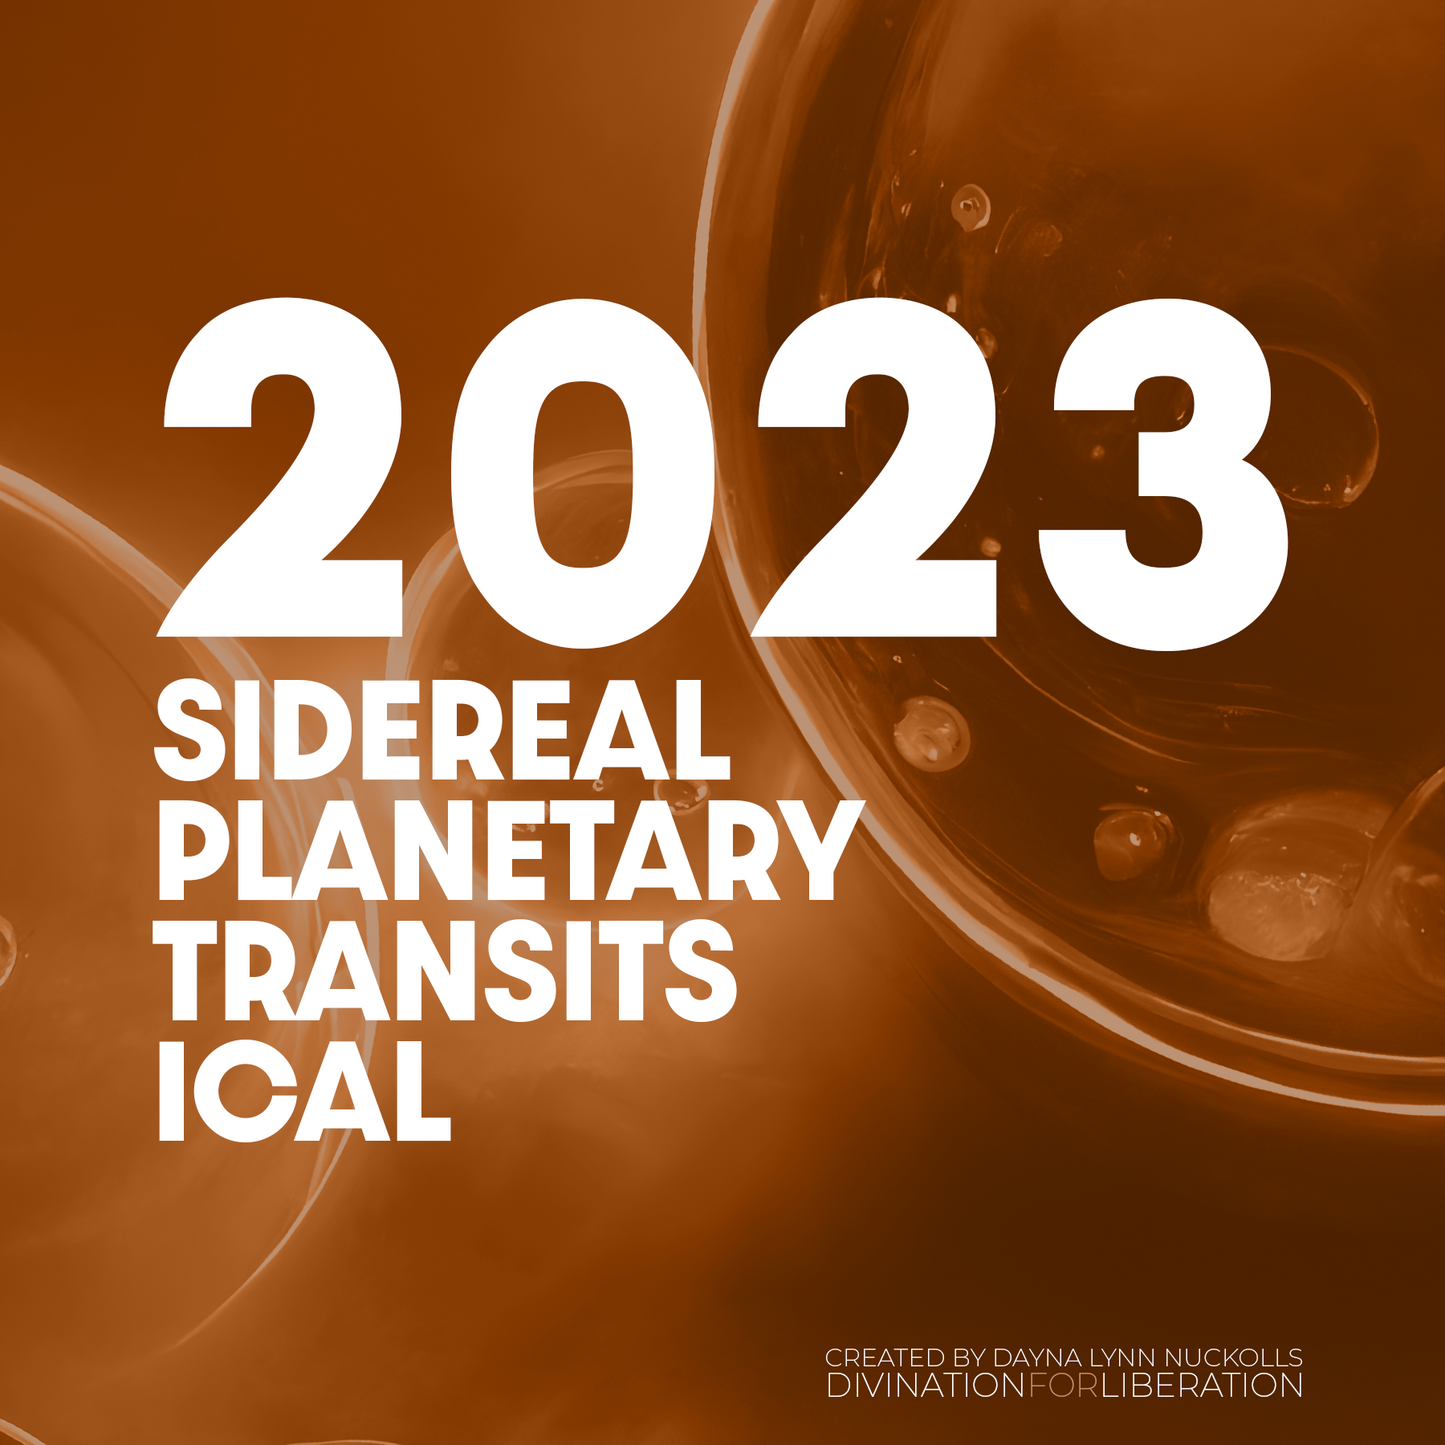 2023 Sidereal Planetary Transits iCal